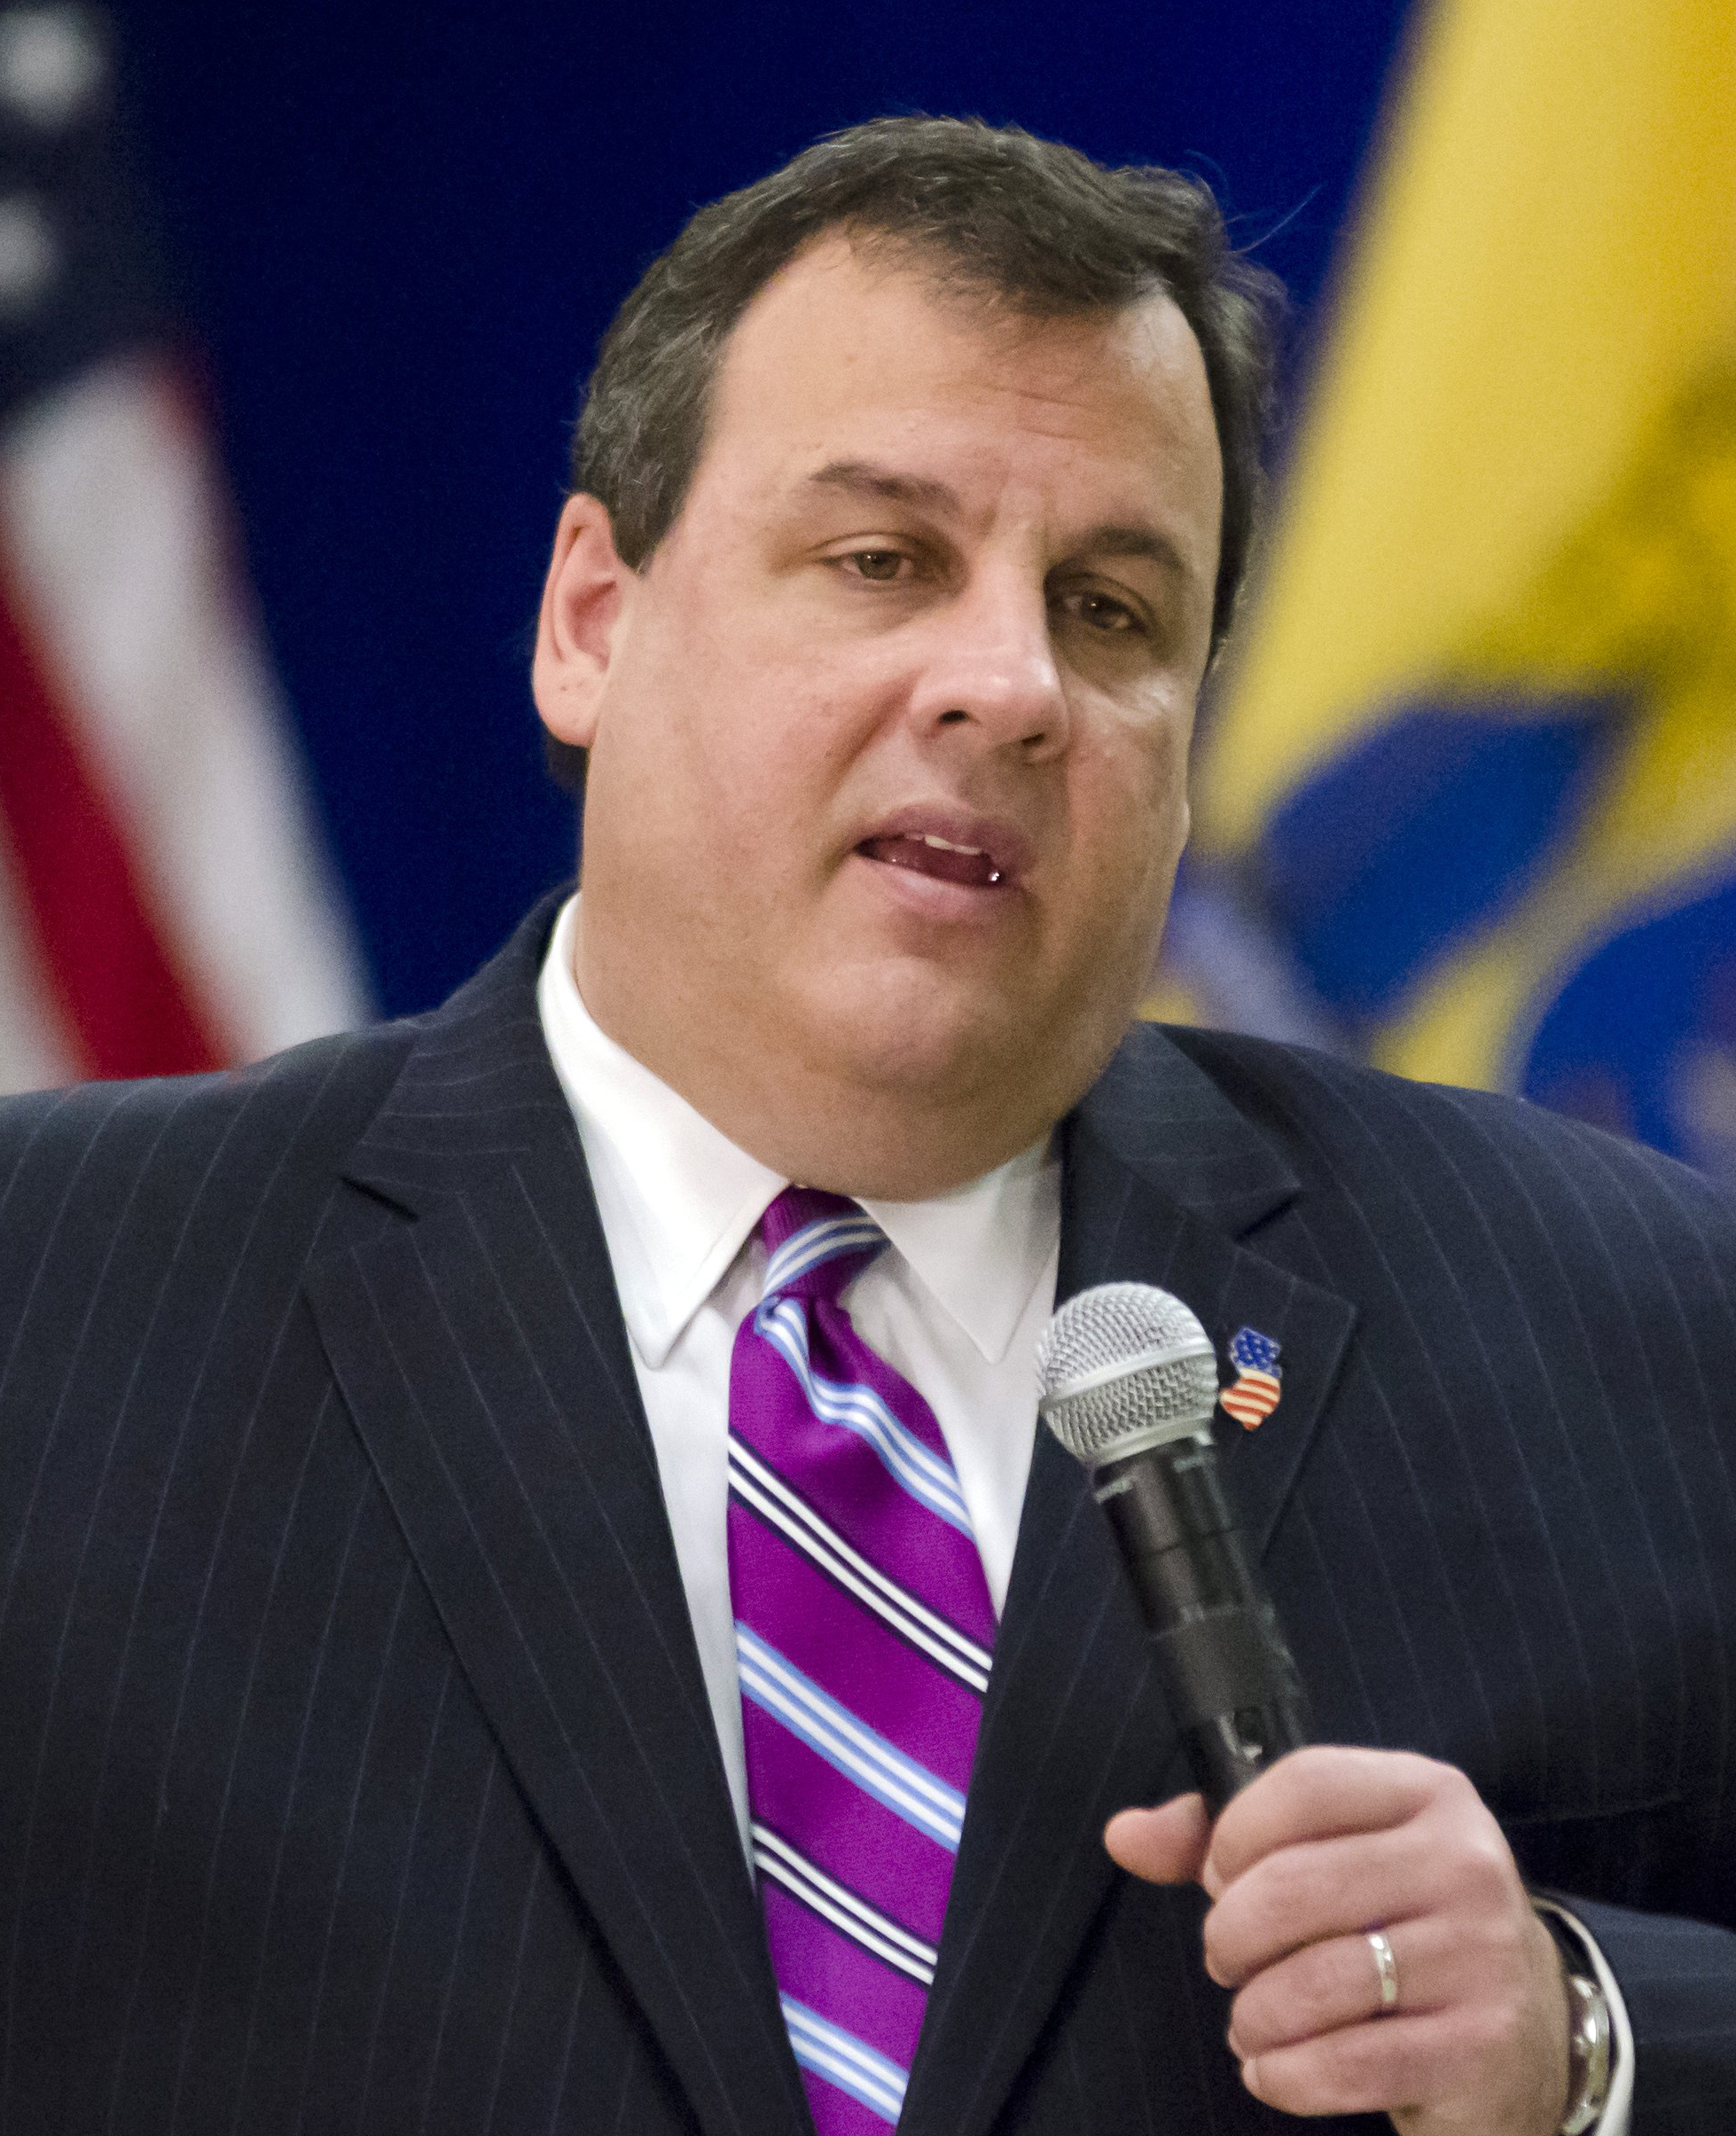 Christie’s 2017 Challengers Already Forming Pension Policies